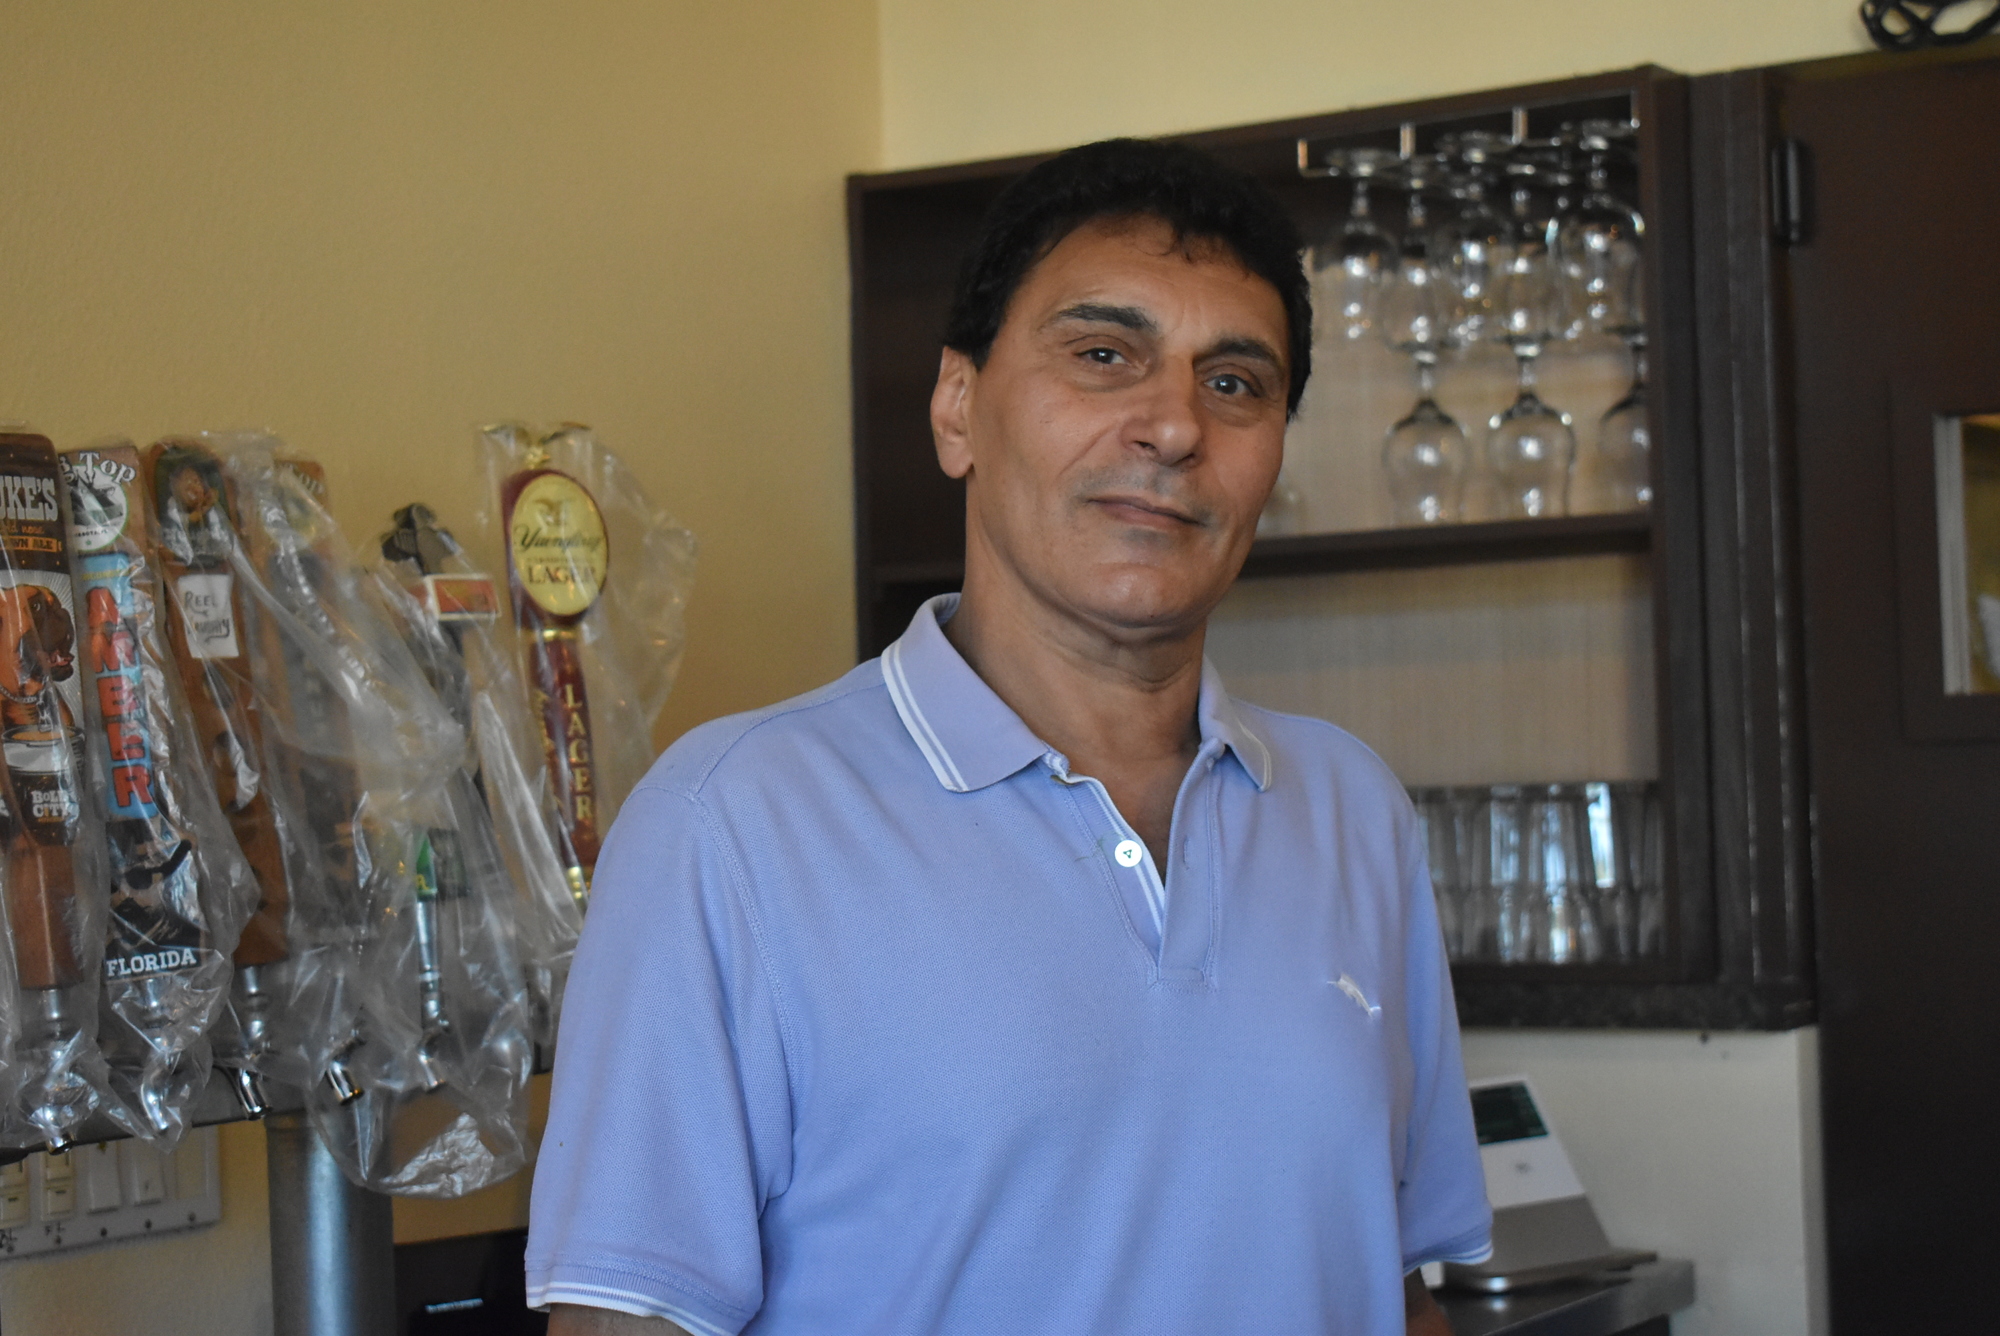 Nabil Rezkalla is a co-owner and chef of Riviera Mediterranean Grille, which serves Italian and Mediterranean food. Rezkalla was born in Egypt and is half-Egyptian, half-Italian.